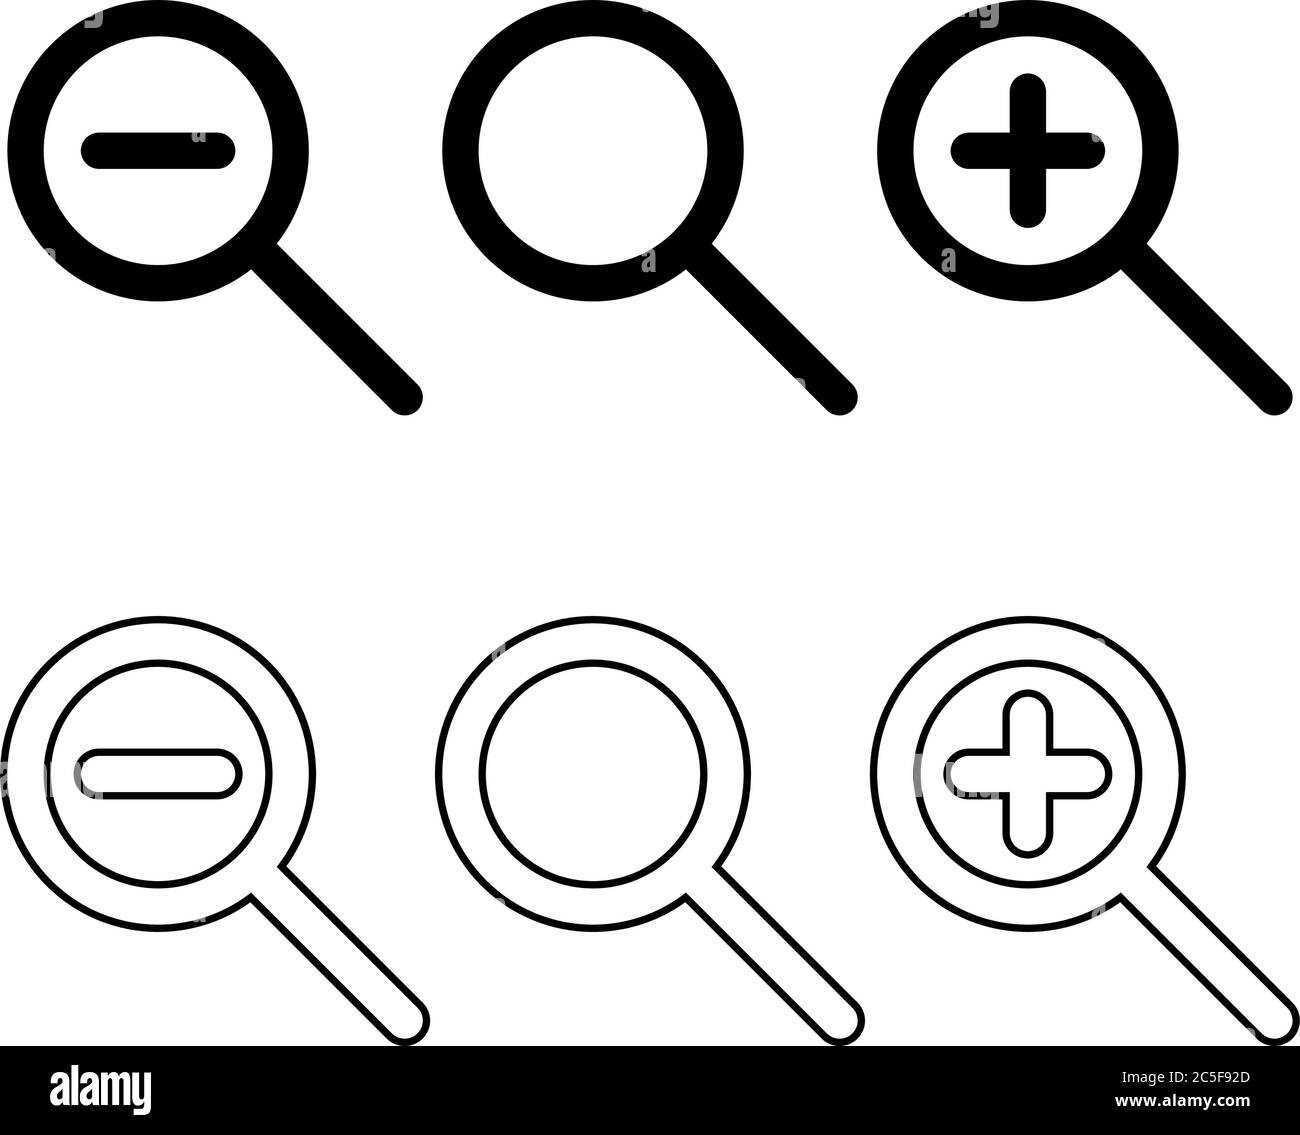 Zoom in, zoom out and search icon set magnifying glass black isolated vector illustration view resize buttons for app or web UI Stock Vector